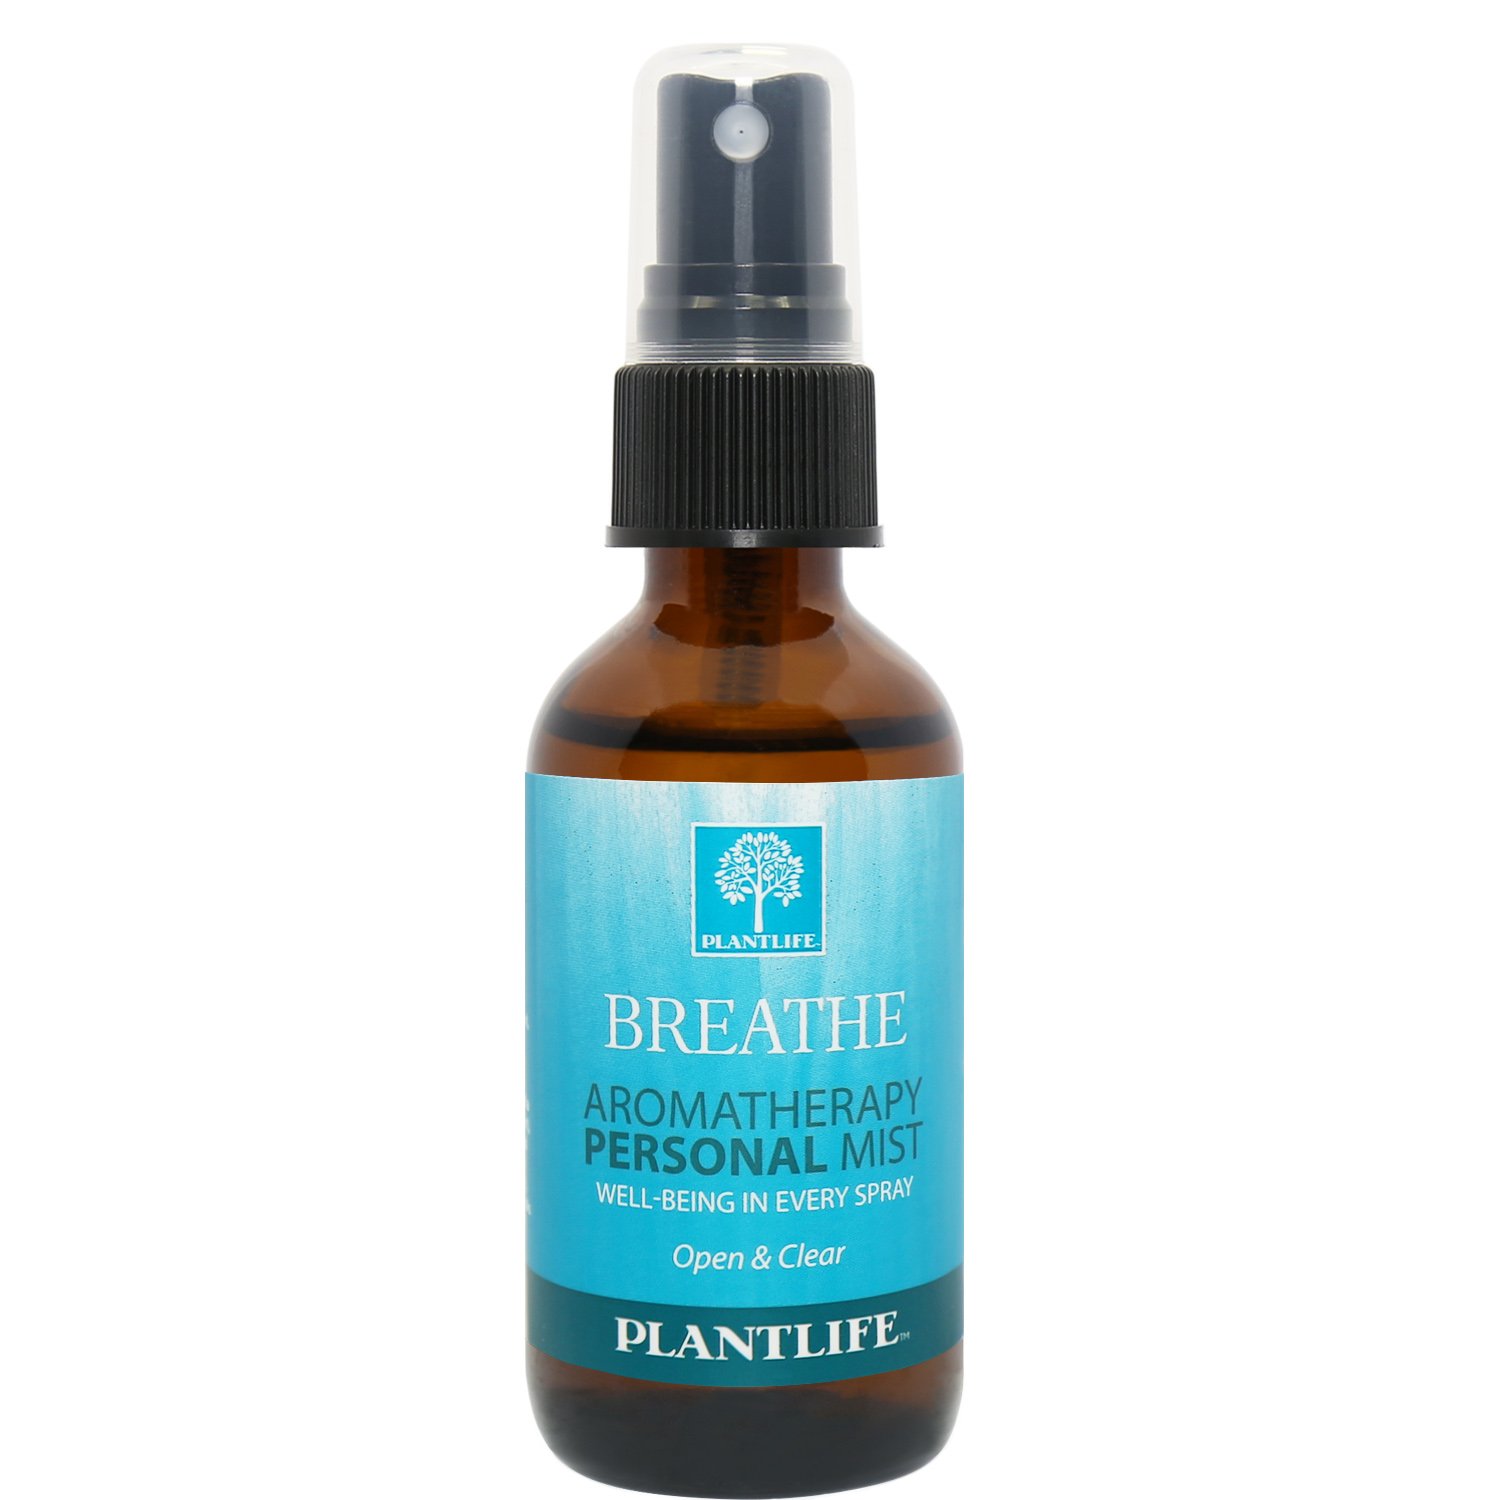 Plantlife Breathe Mist Face and Body Spray - Straight From The Plant 100% Pure Therapeutic Grade - Take with You Everywhere - Made in California 2 oz